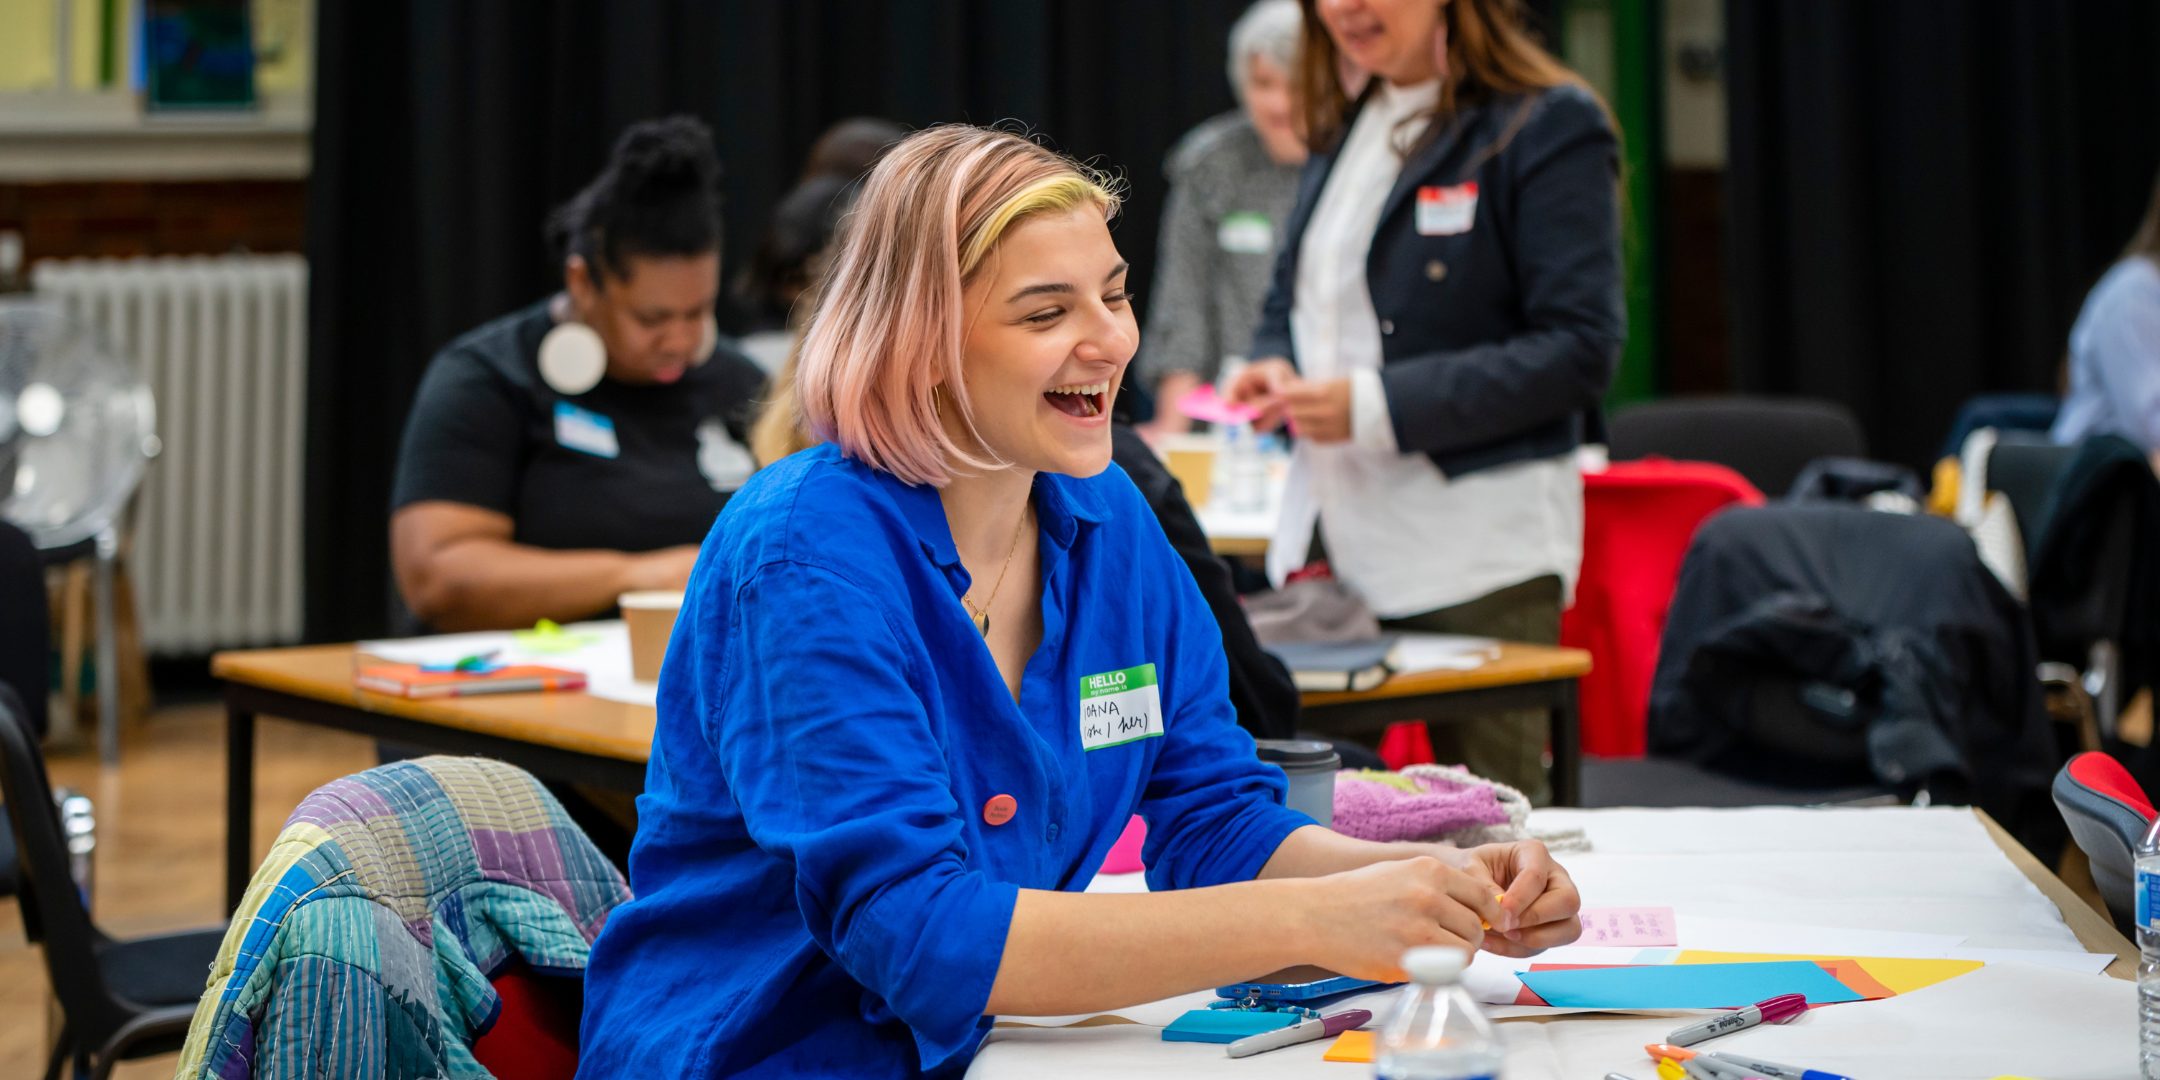 A person with pink hair that reaches their chin is wearing a bright blue shirt. They are smiling and leaning on a table covered with art supplies like post it notes and pens. There are people in the background - it looks like a fun, educational event